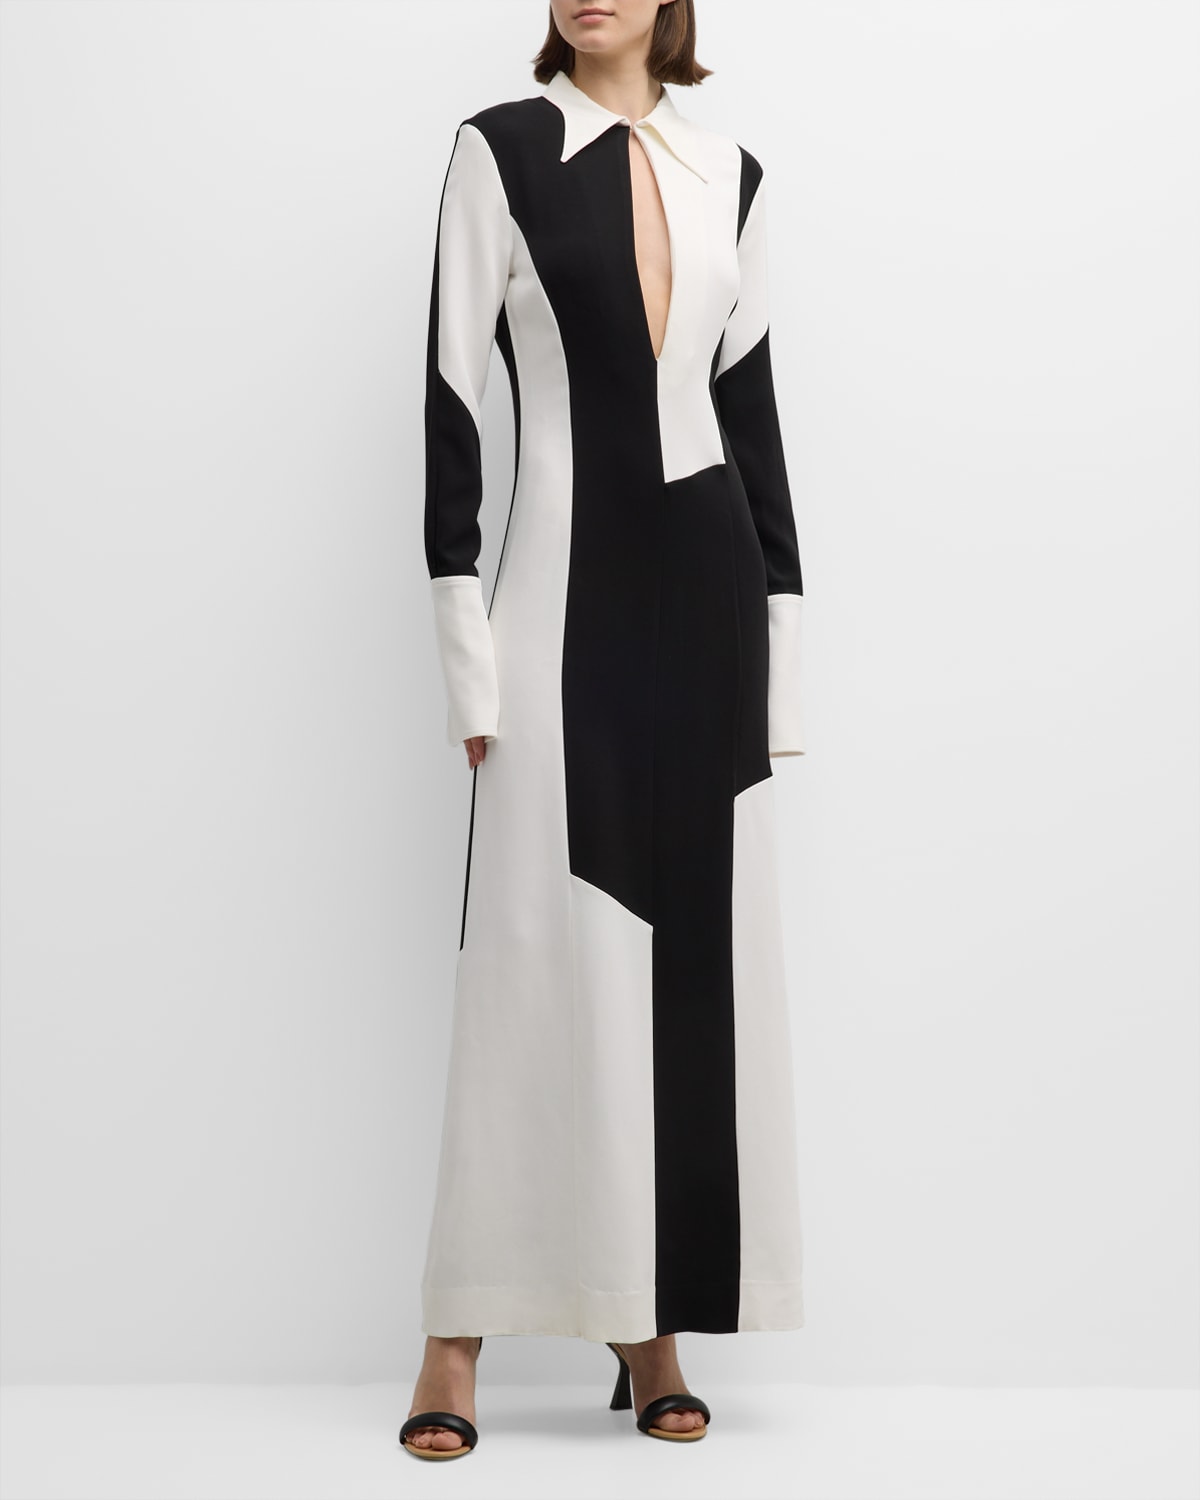 BITE STUDIOS COLORBLOCK PANELED LONG-SLEEVE KEYHOLE COLLARED GOWN